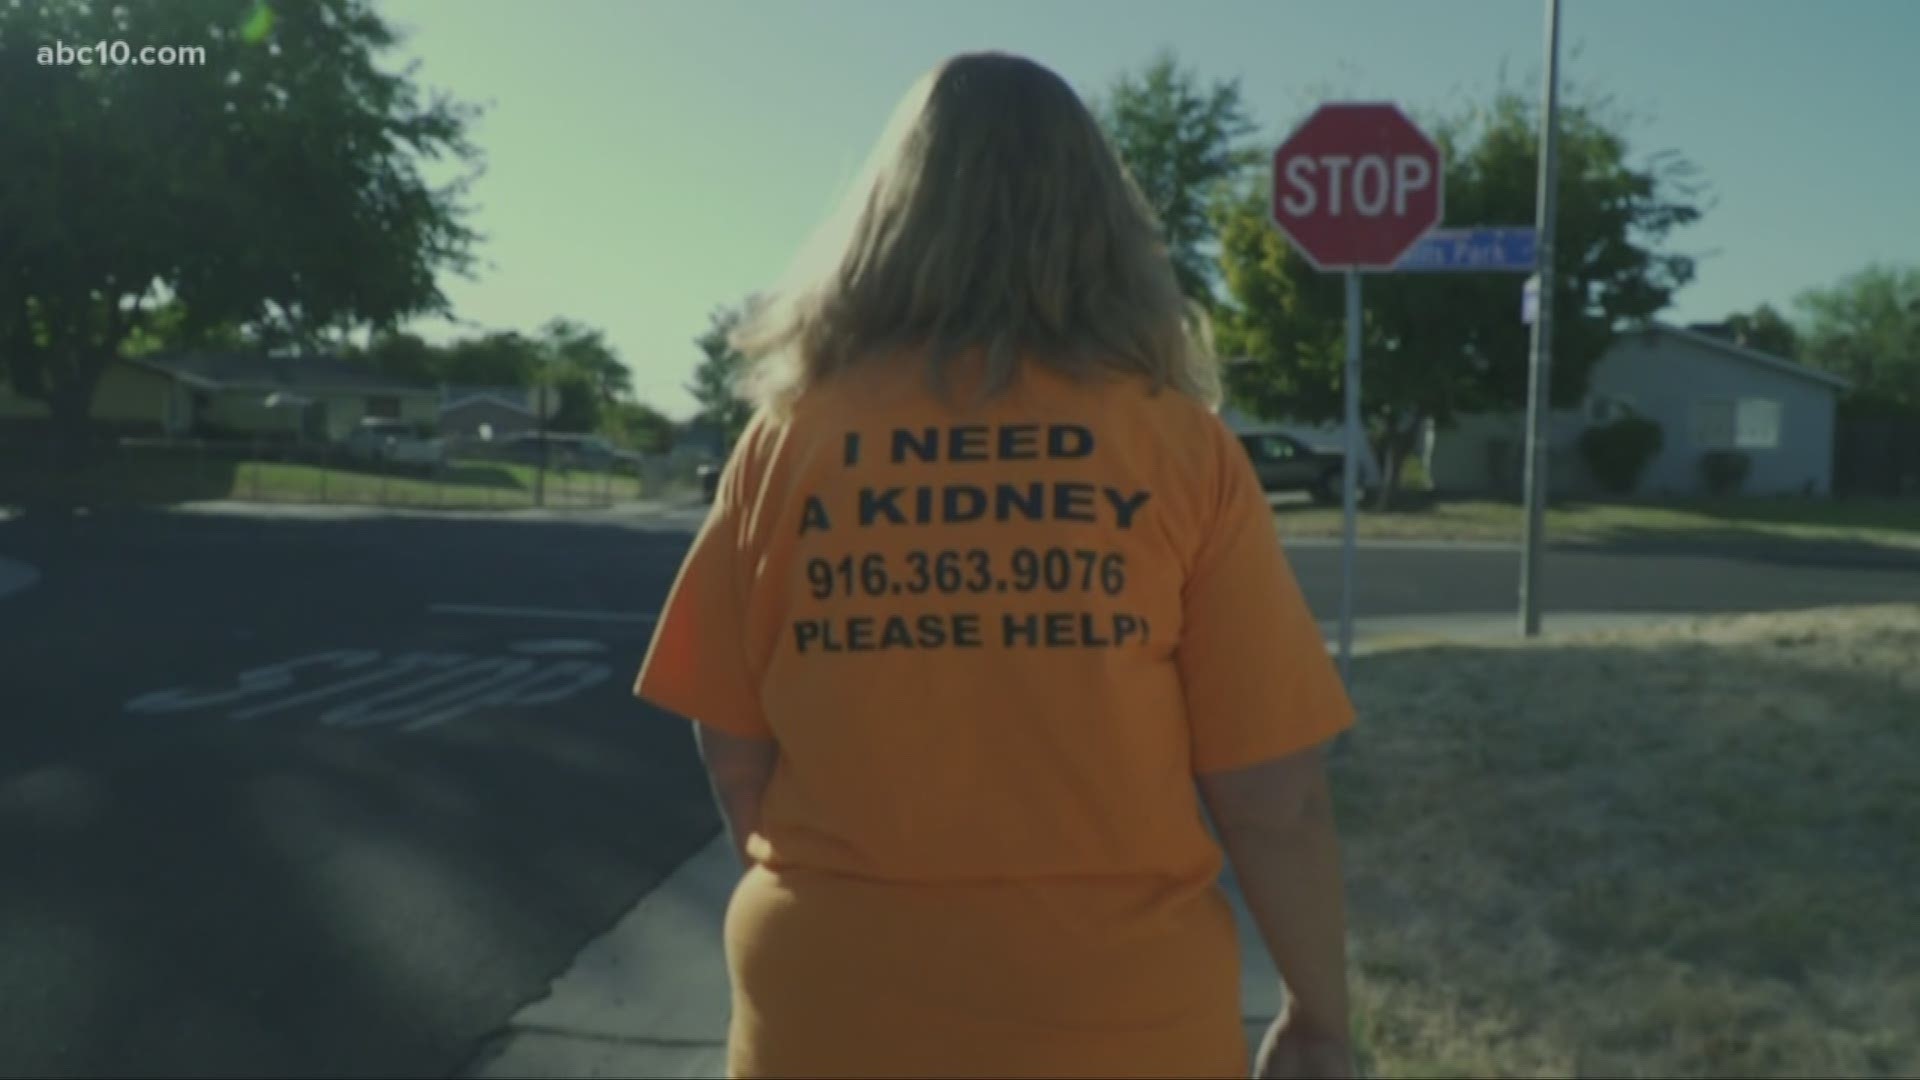 April Simmons of Rancho Cordova walks several miles a day and goes out with her "I need a kidney" T-shirt. She started it this summer.